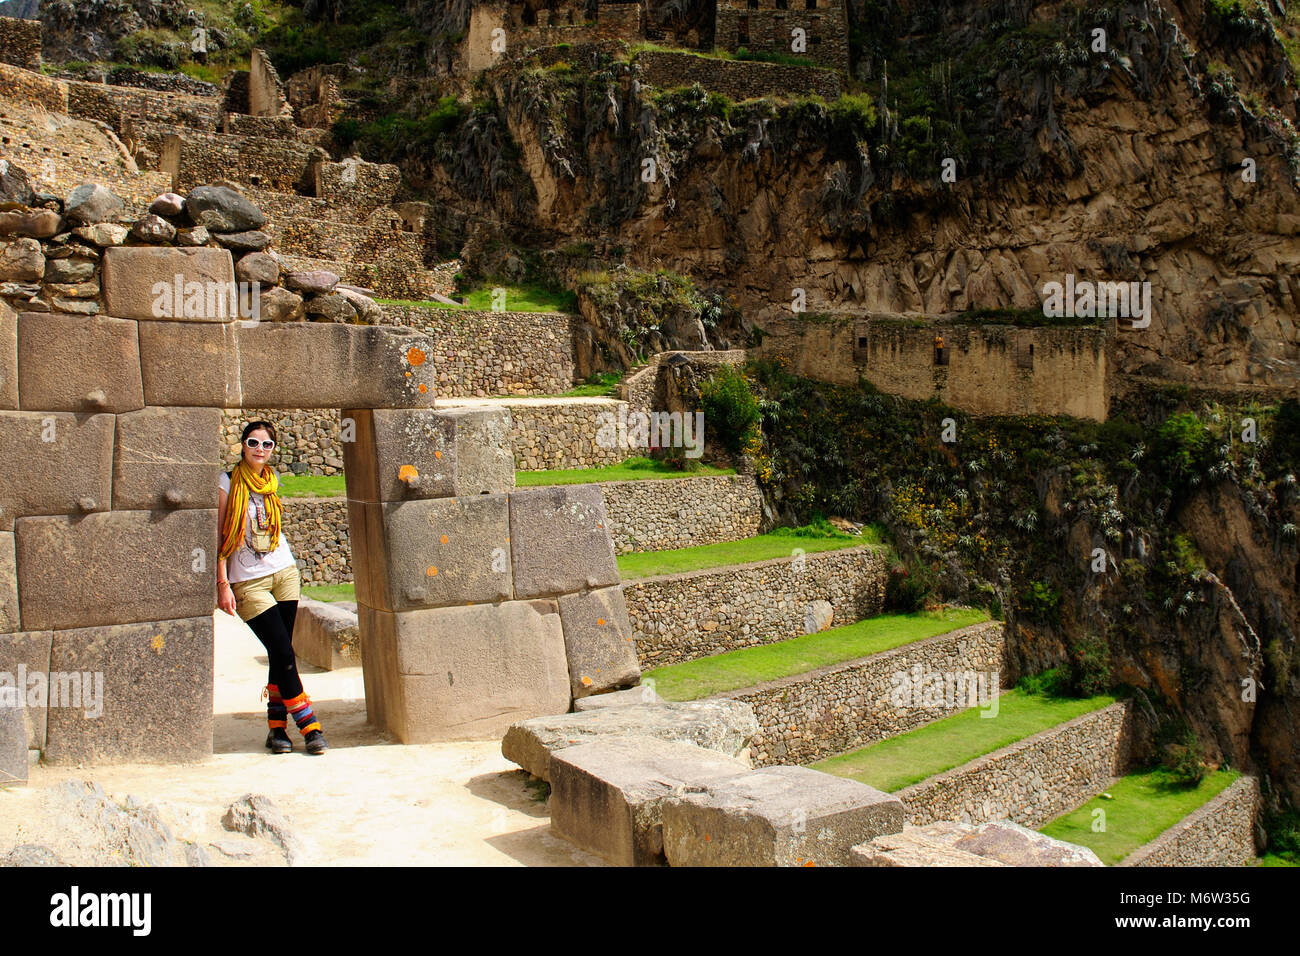 Tourist in the Ollantaytambo incan fortress ruins, remote, spectacular the Inca ruins near Cuzco. Cultivated terrace fields on the steep sides Stock Photo